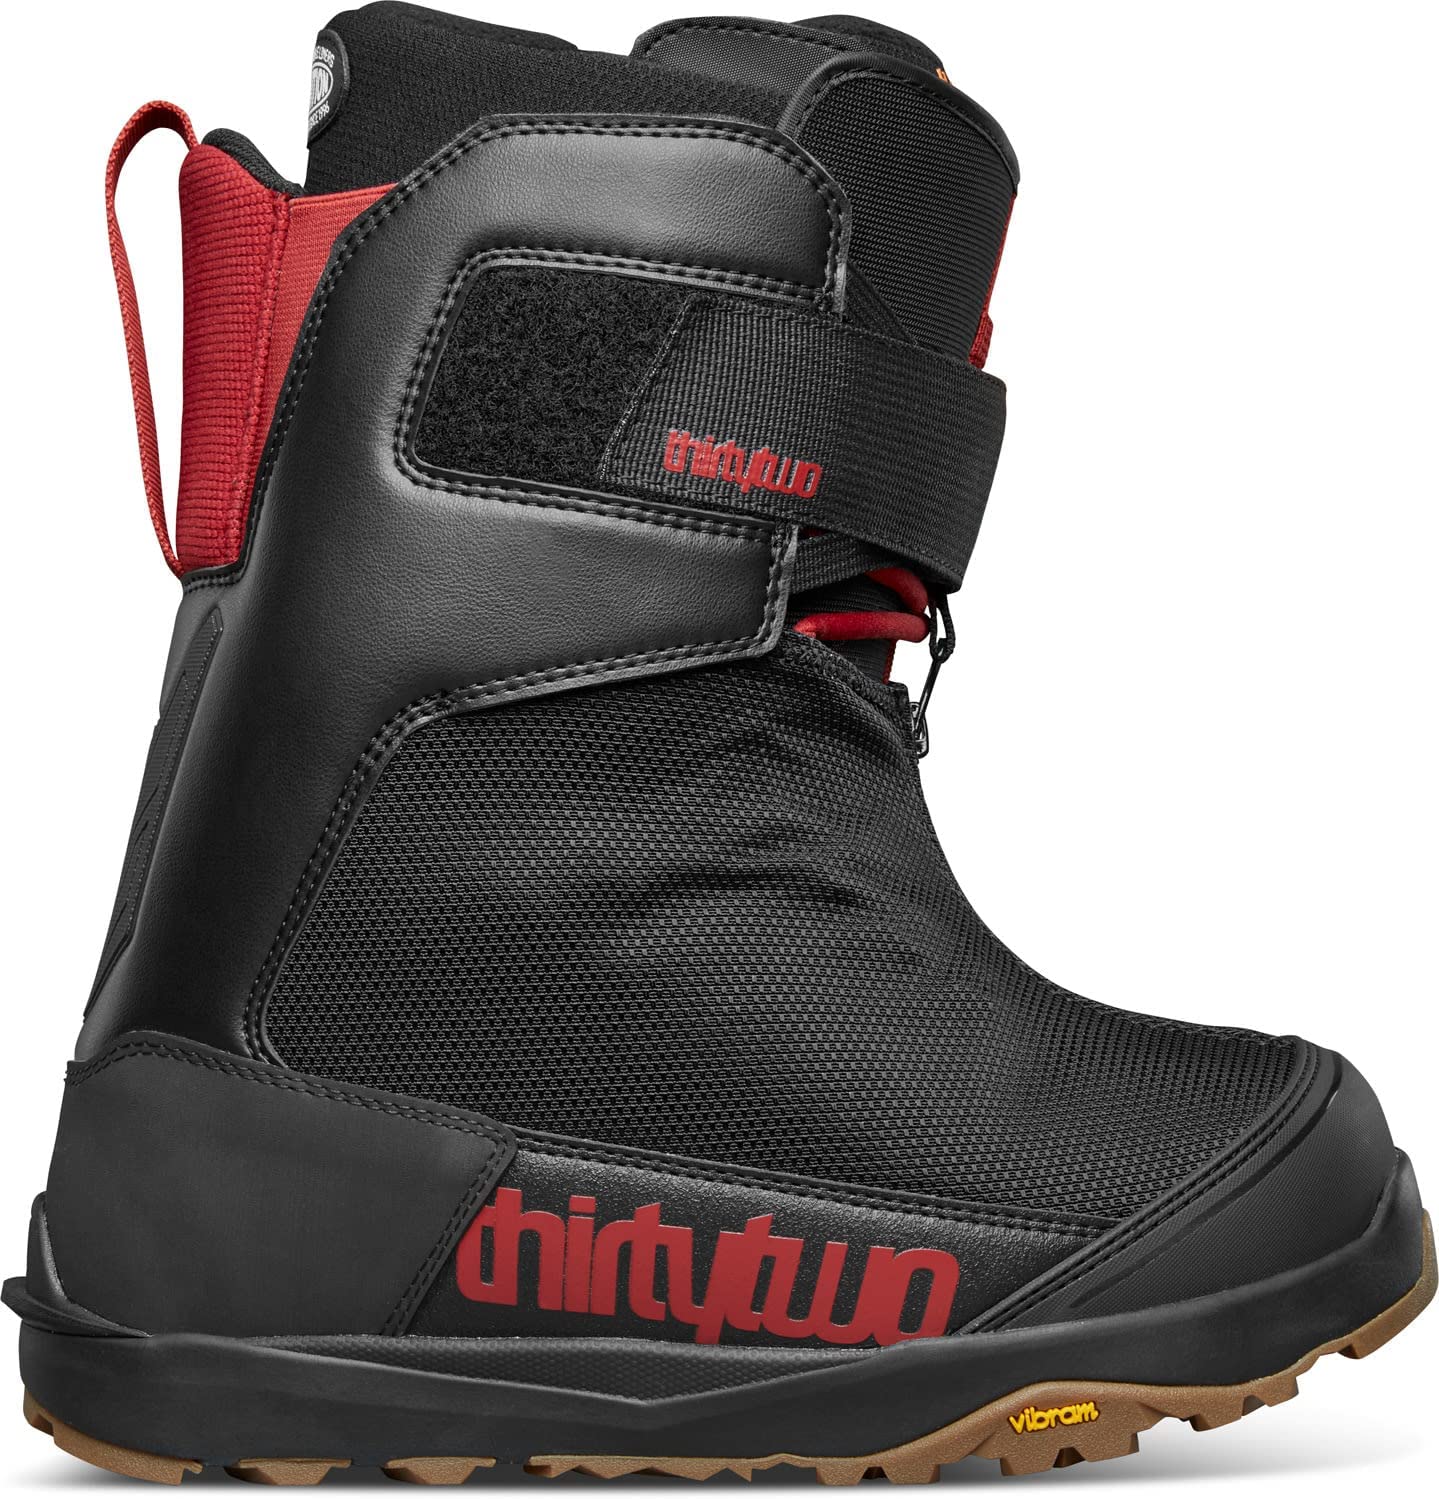 ThirtyTwo TM-2 Jones '22 Mens Snowboard Boots - Invisible Board Shop